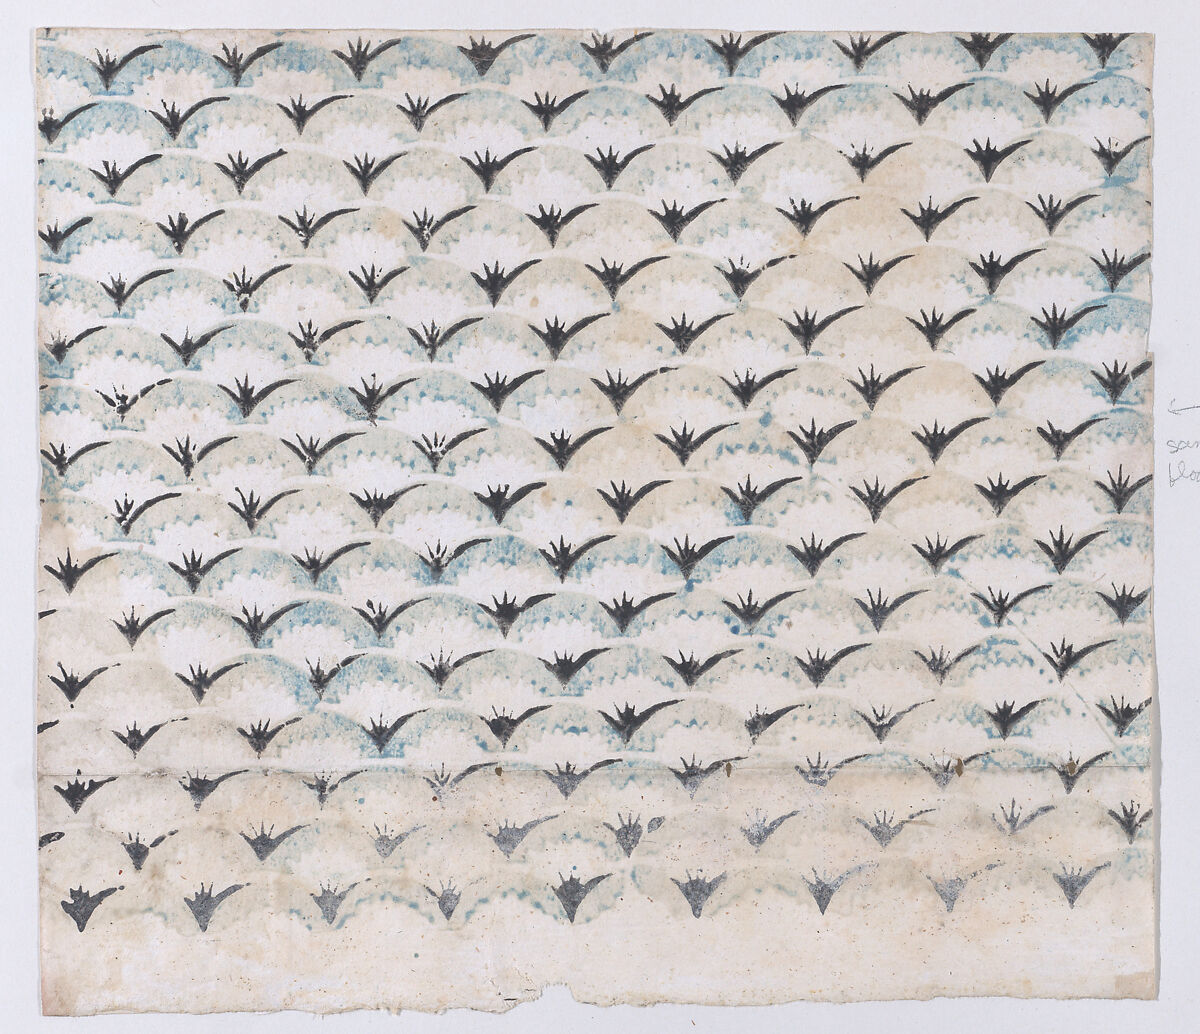 Sheet with overall curved abstract pattern, Anonymous  , 19th century, Relief print (wood or metal) 